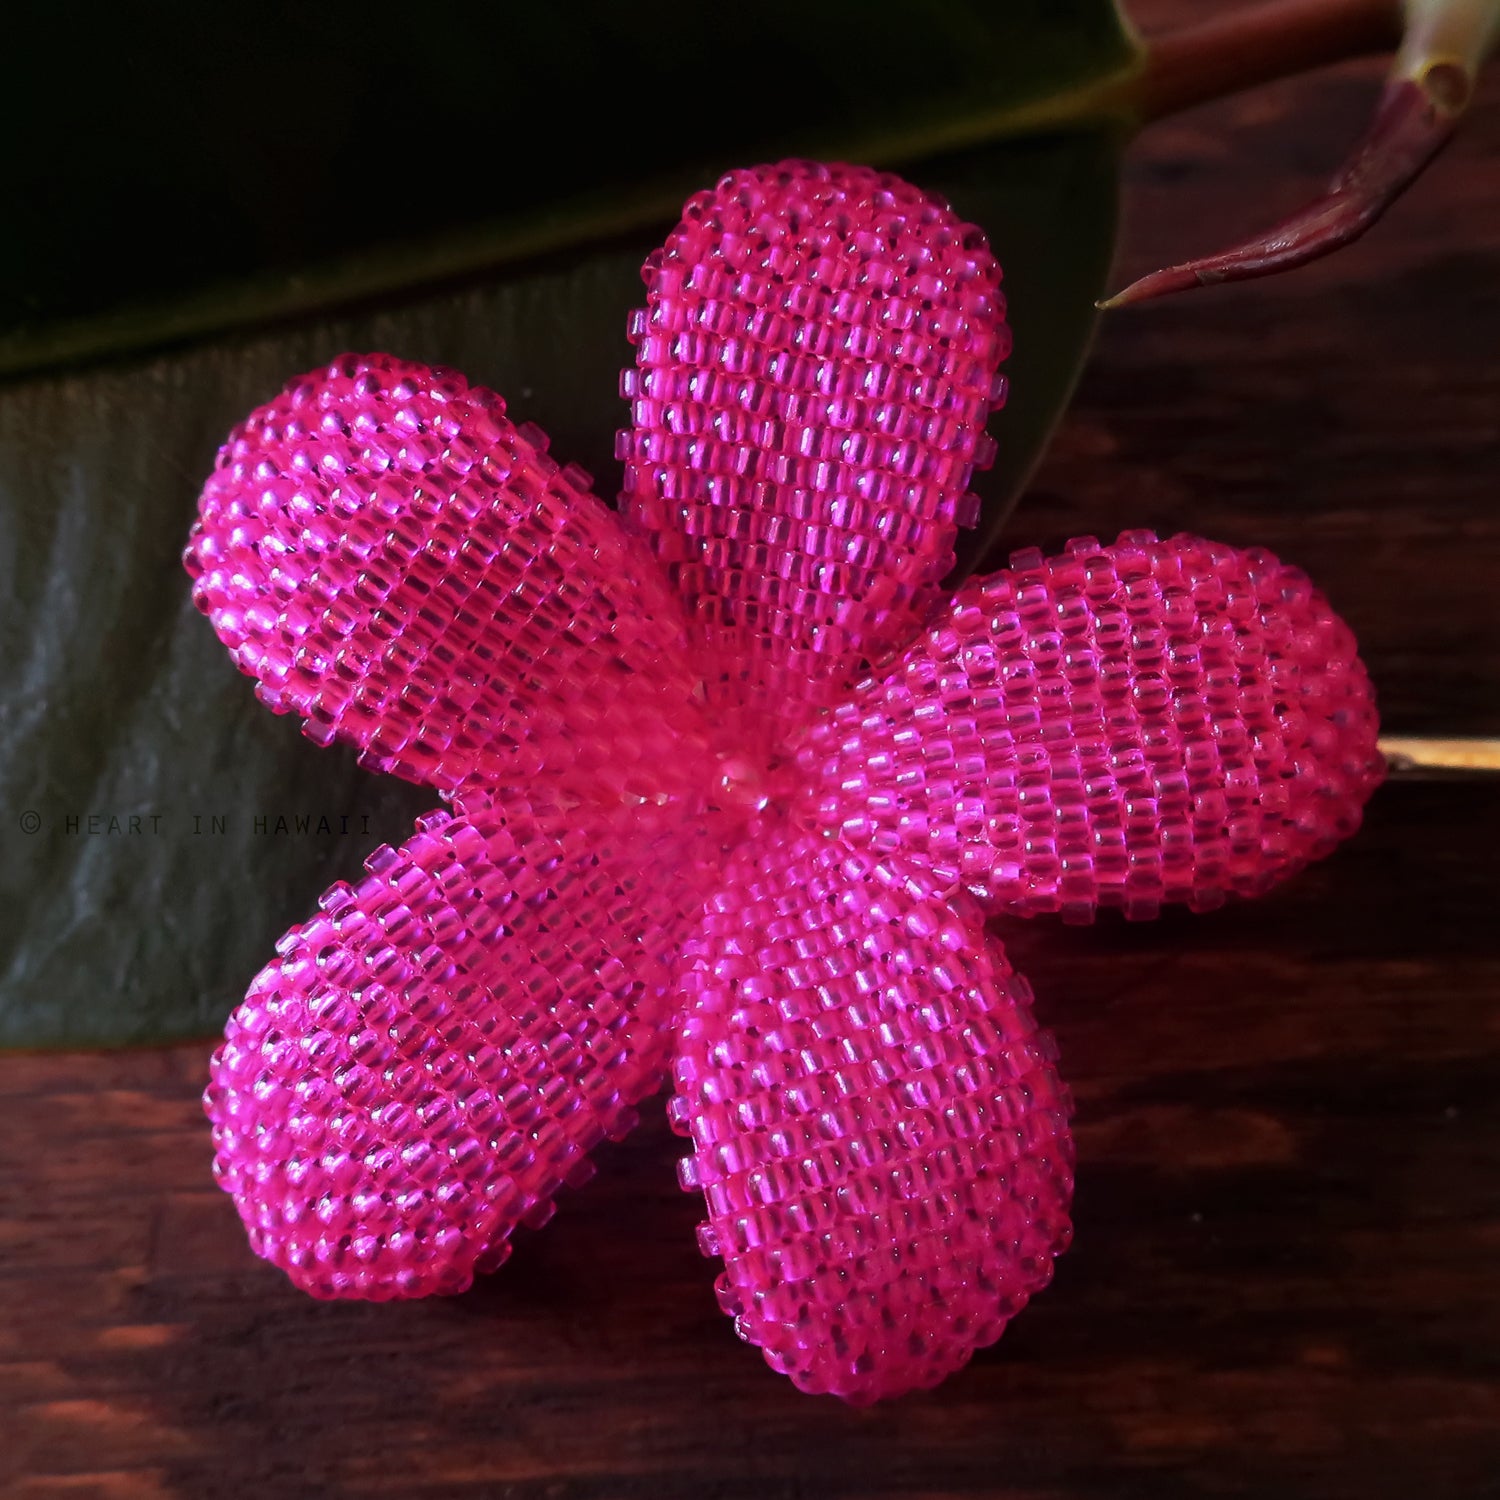 Sturdy Crocheted Cast Iron Handle Cover - Pink Plumeria Maui